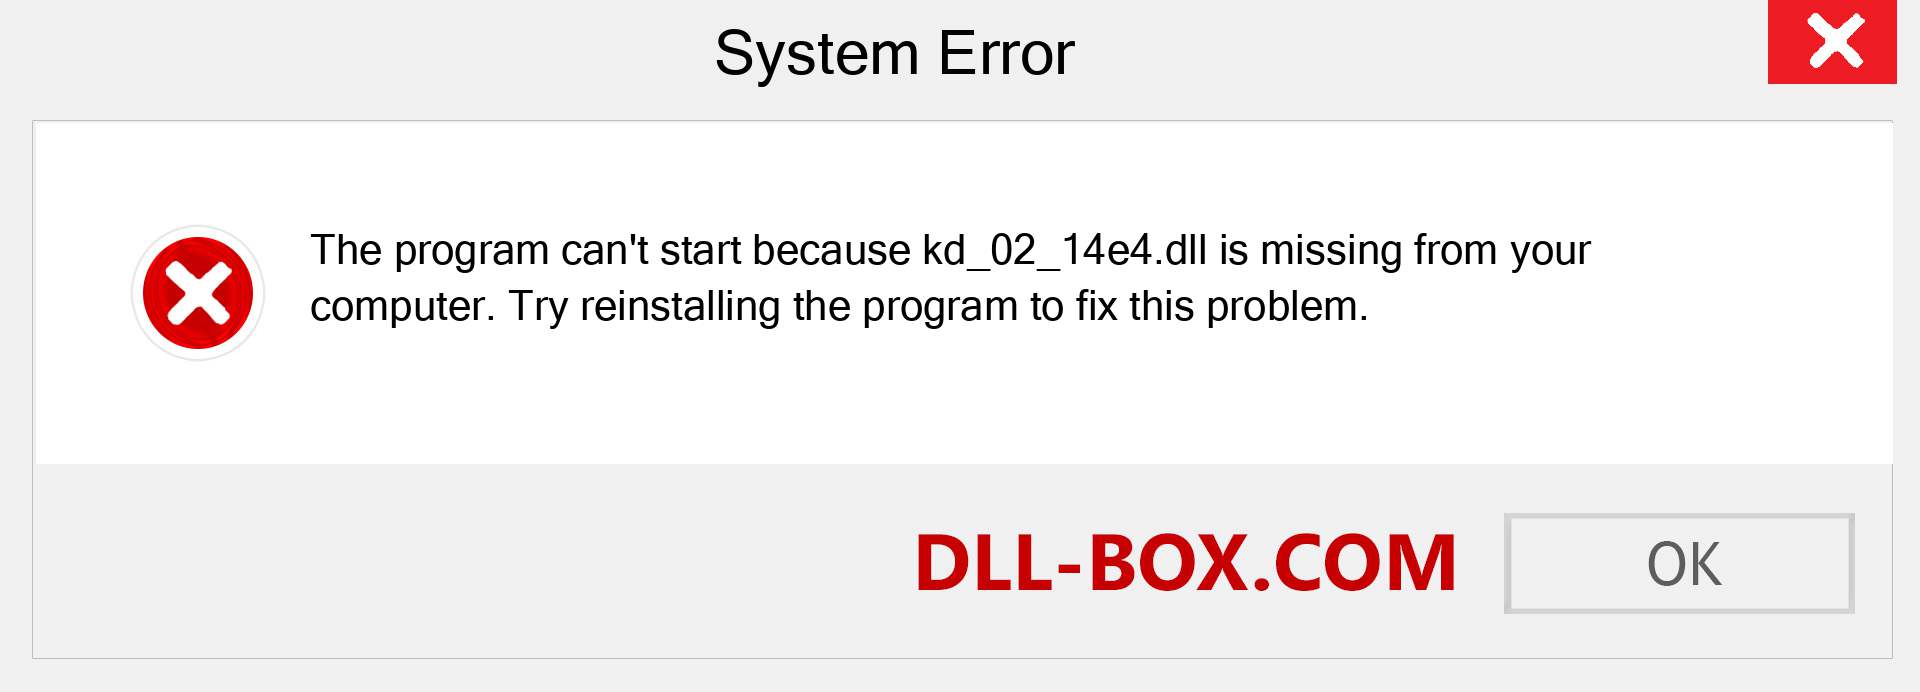  kd_02_14e4.dll file is missing?. Download for Windows 7, 8, 10 - Fix  kd_02_14e4 dll Missing Error on Windows, photos, images